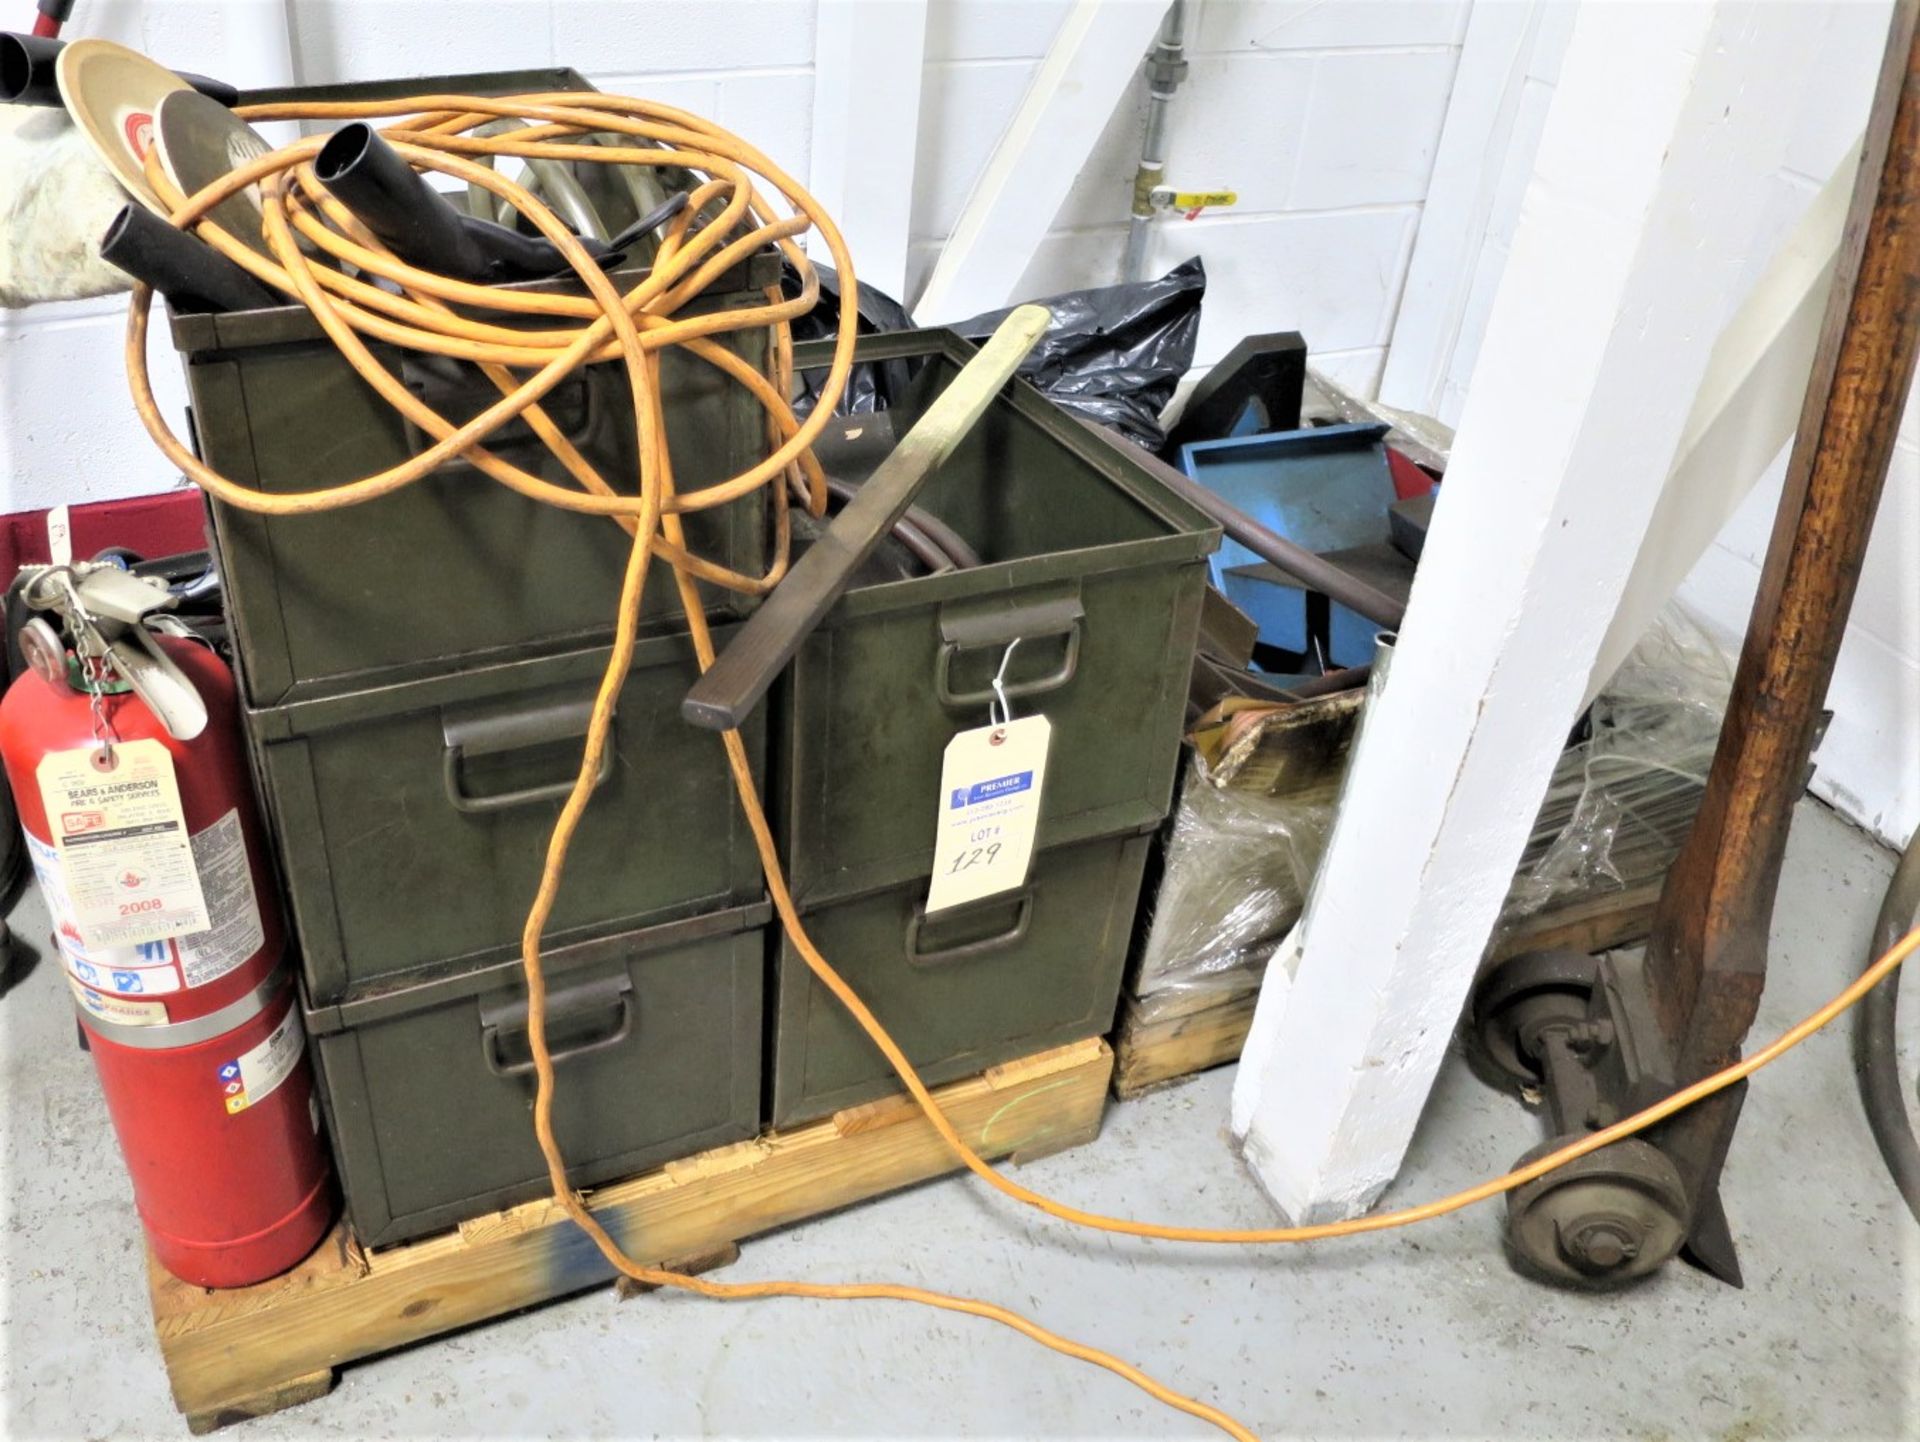 Pallet with metal bins, fire extinguishers, and misc. tools